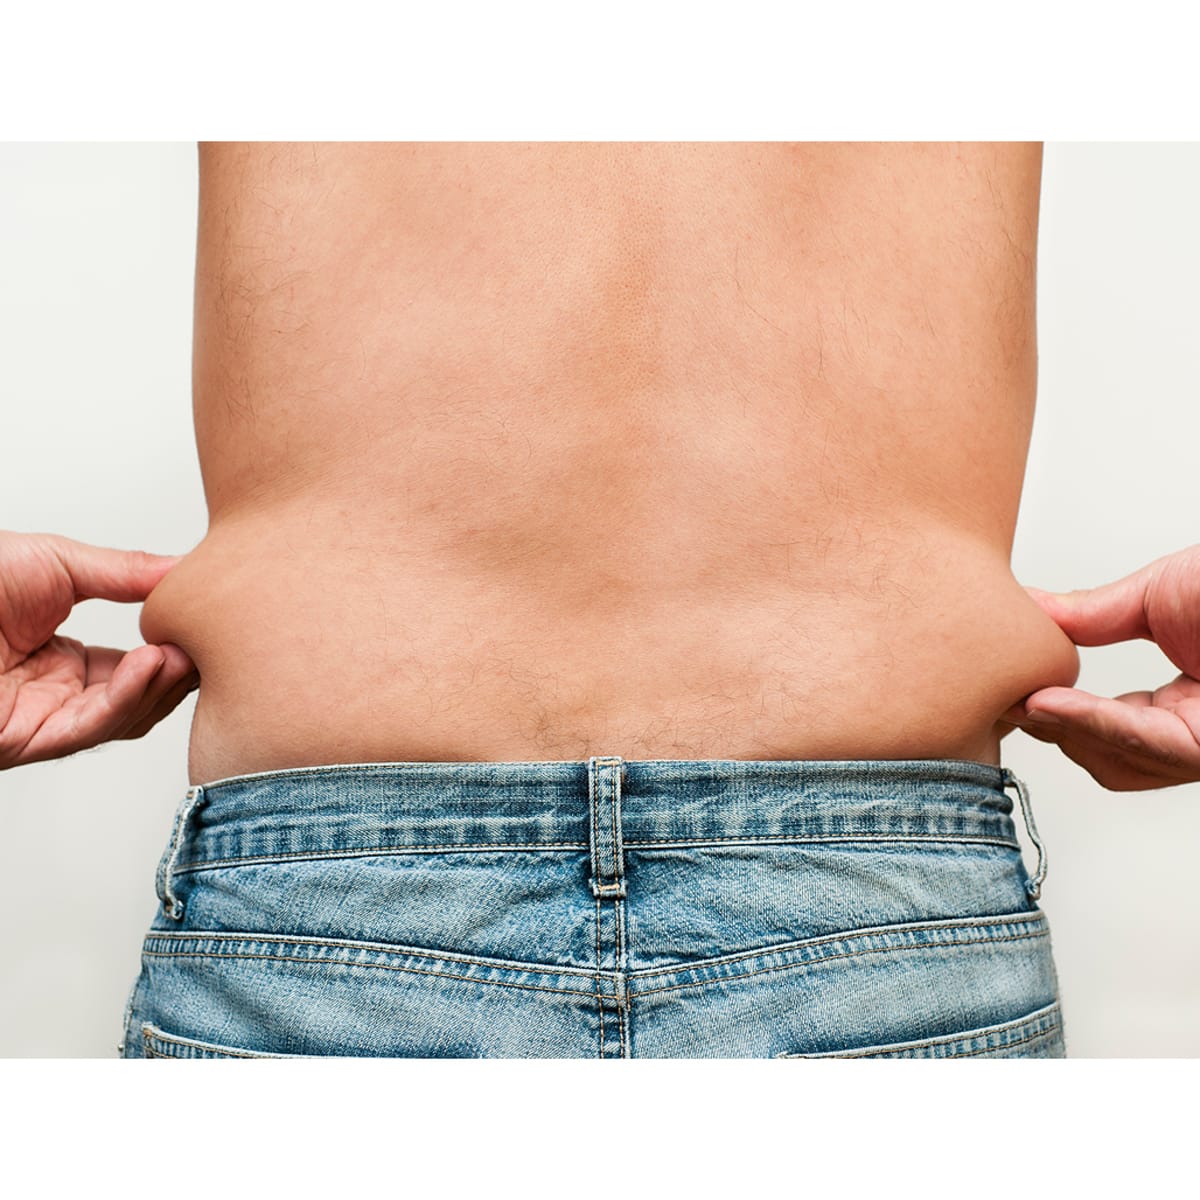 20 Best Tips to Lose Stubborn Fat All Over Your Body